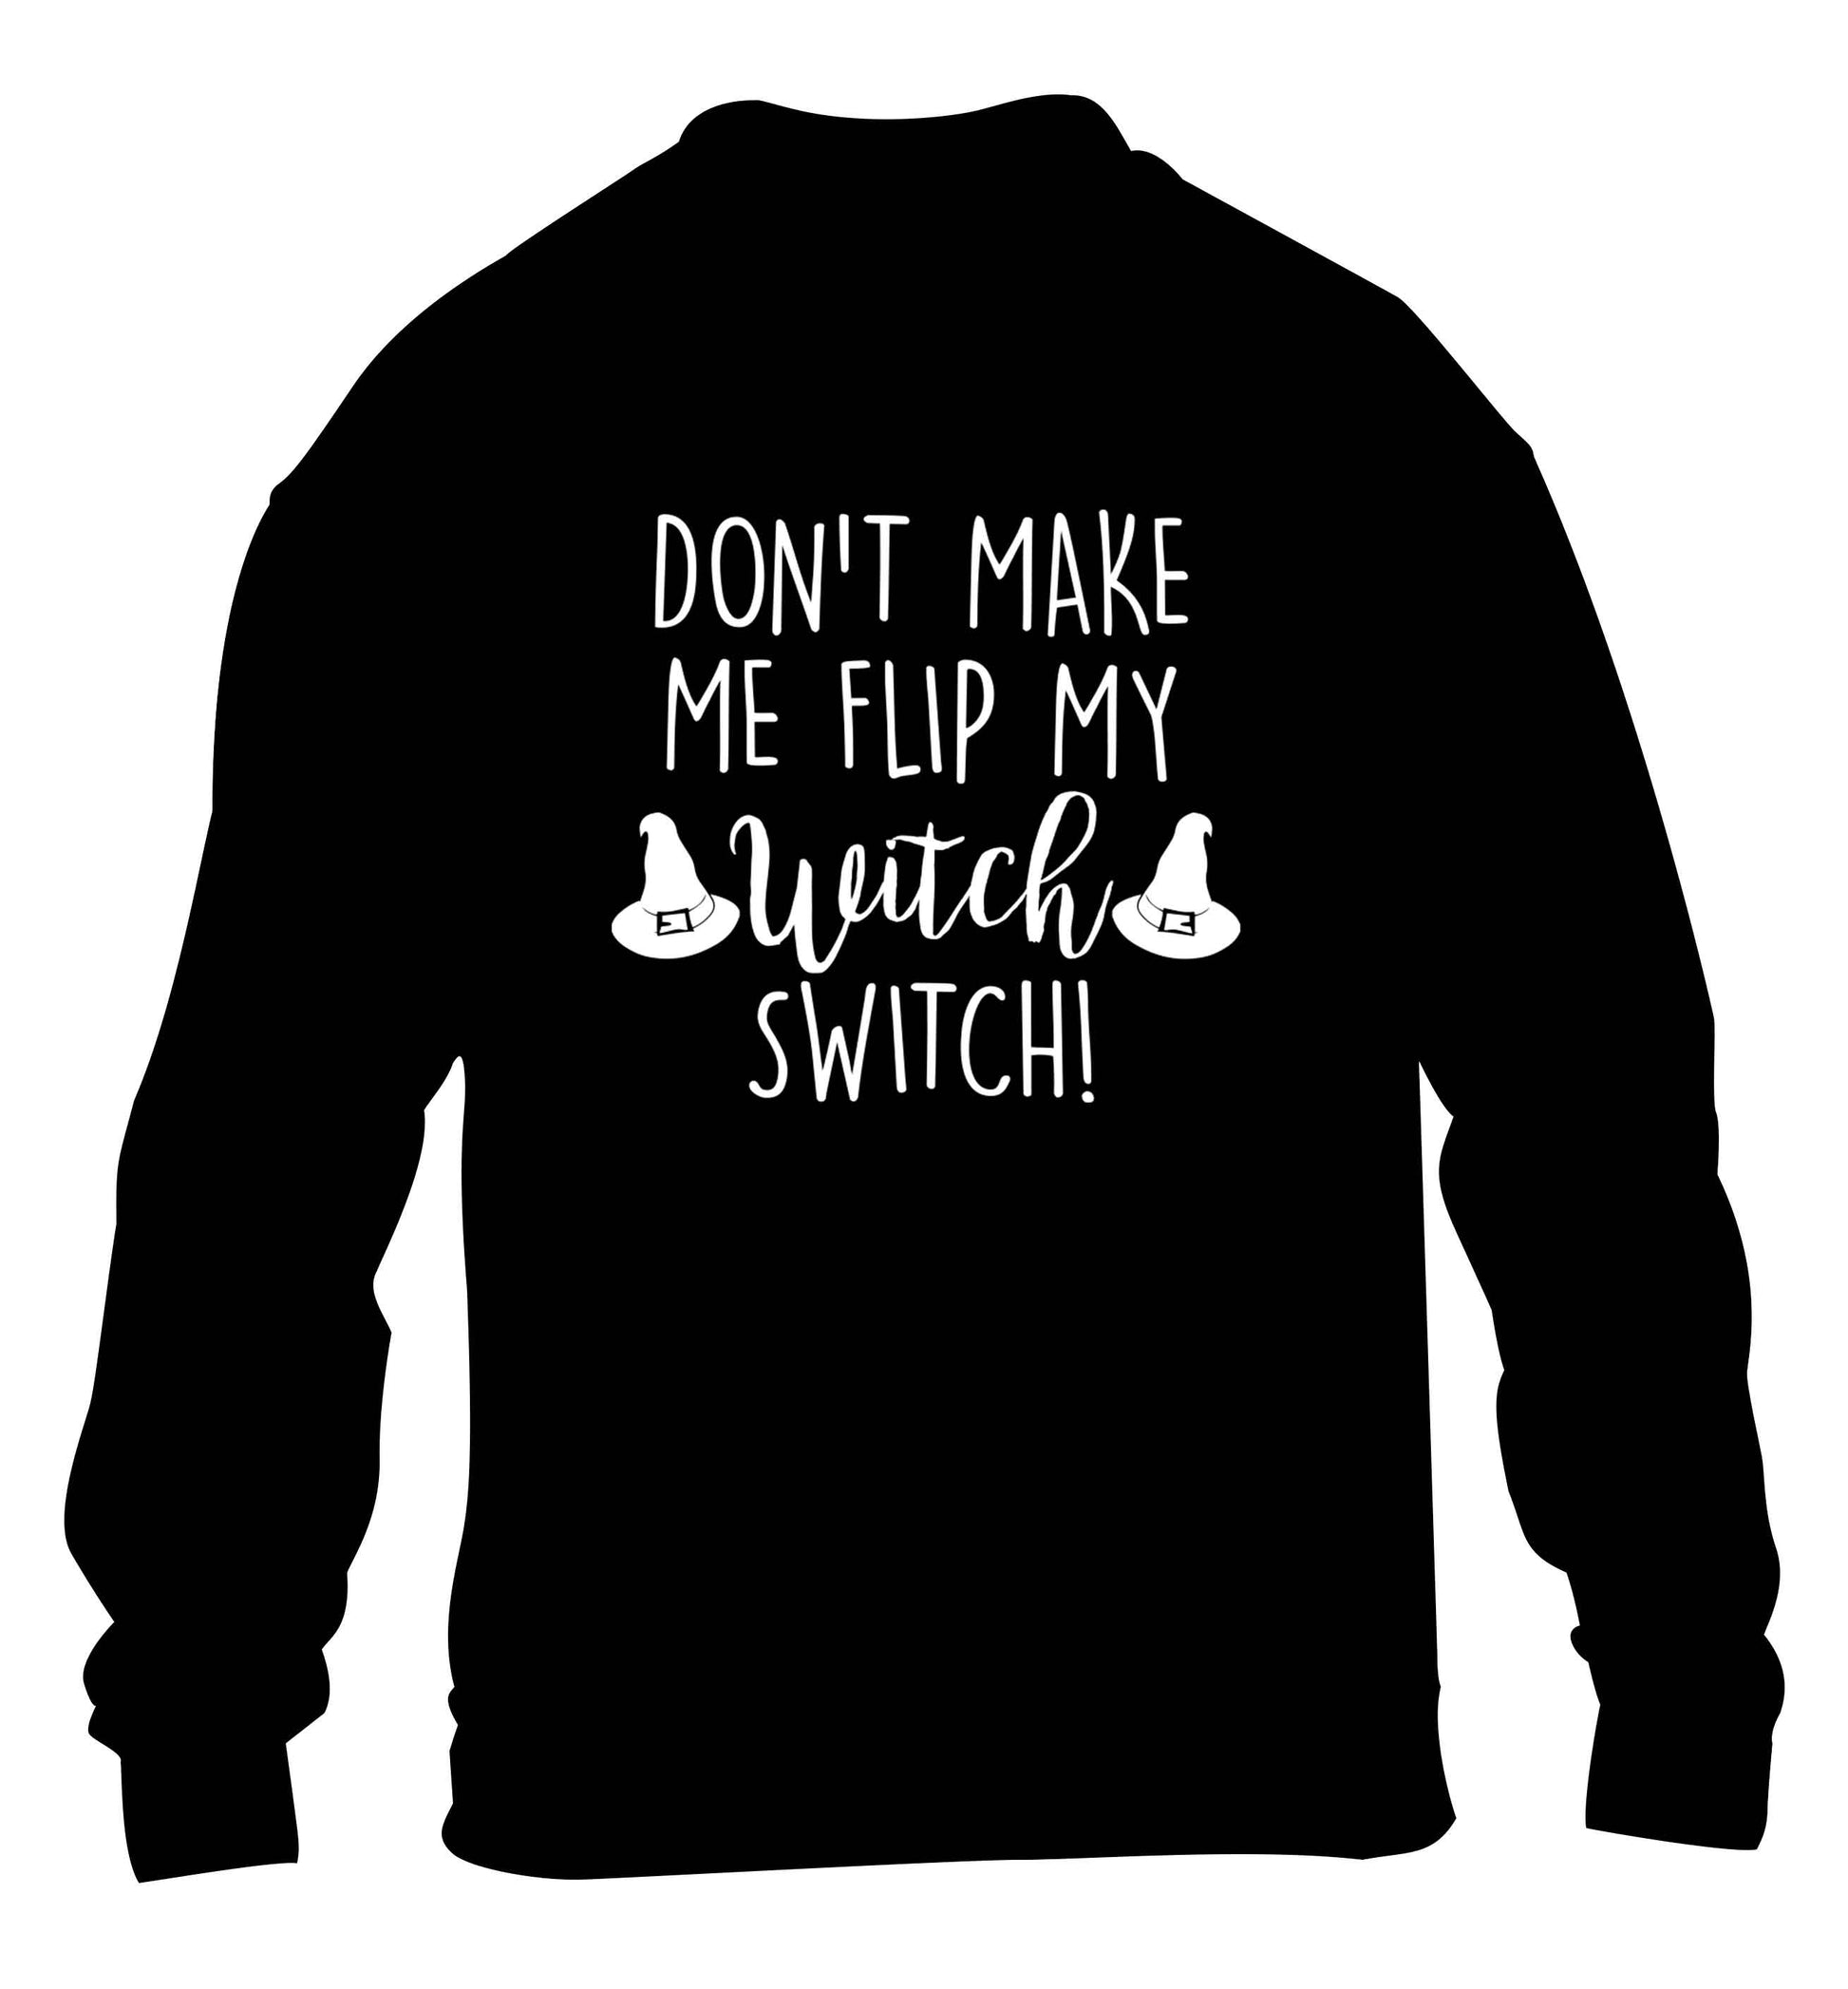 Don't make me flip my witch switch children's black sweater 12-13 Years